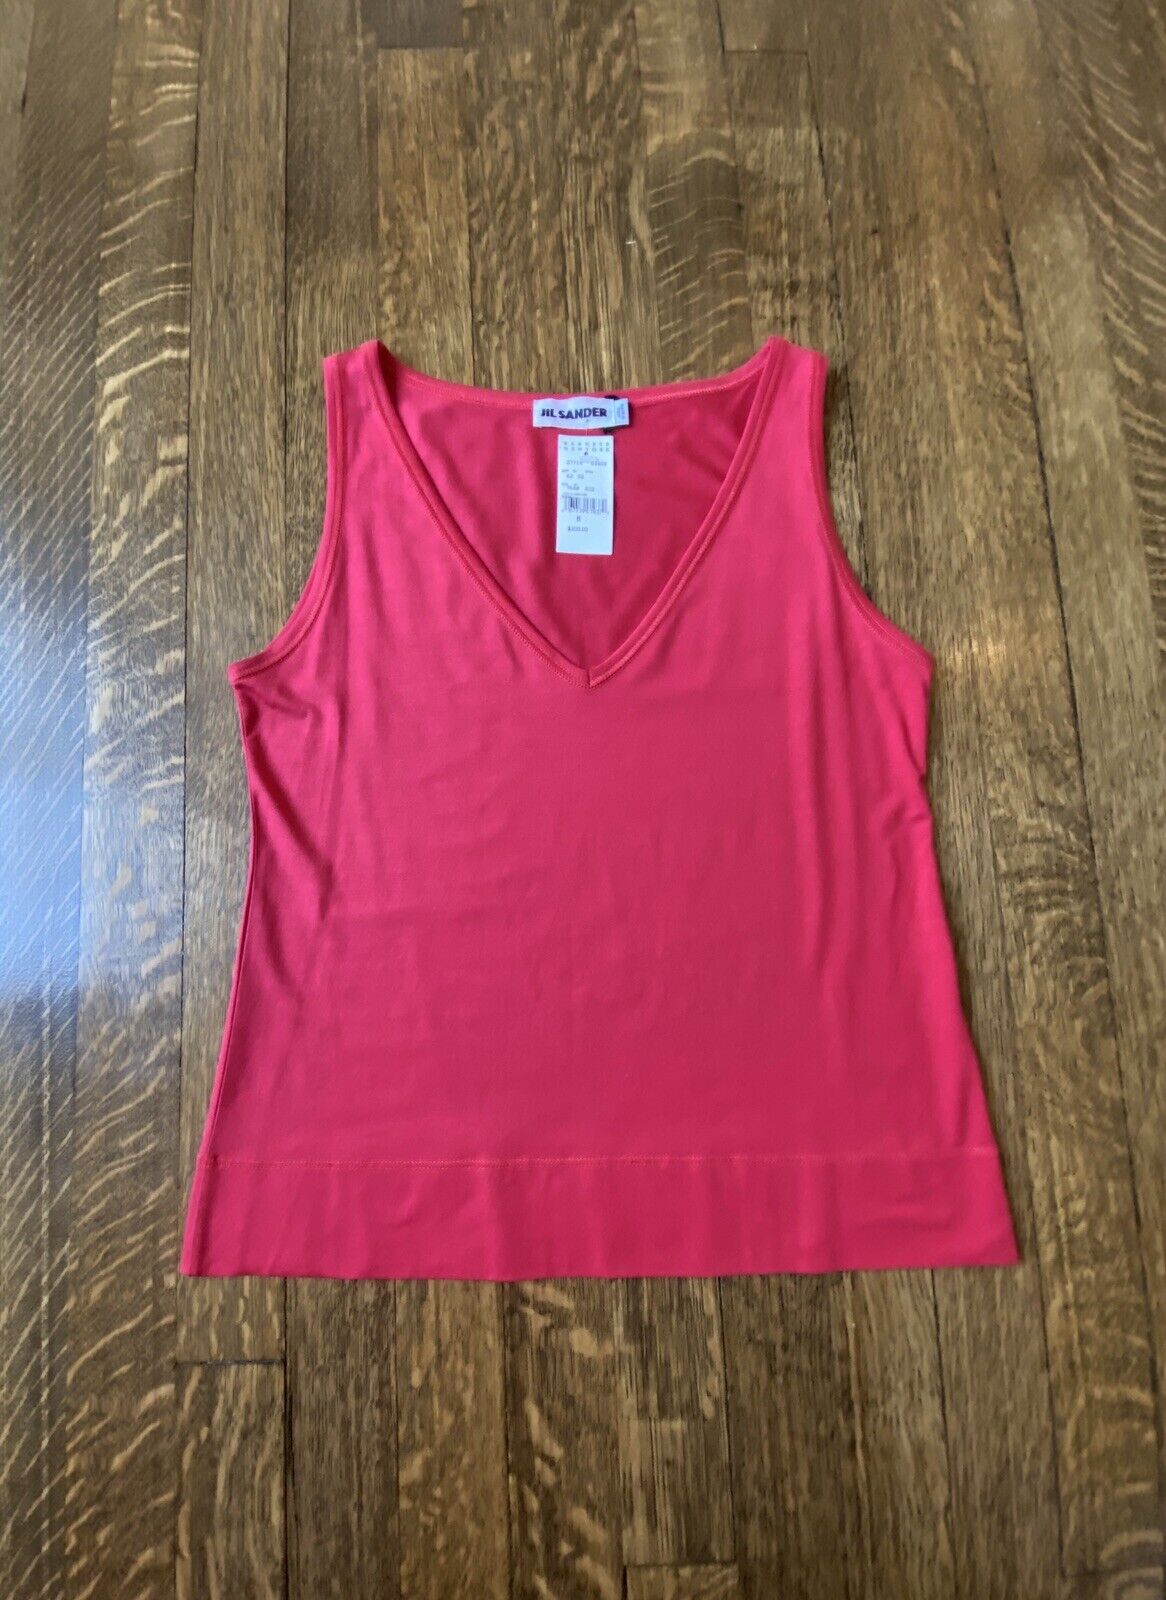 NEW WITH TAGS NWT JIL SANDER Silk Elastane Sleeveless Coral Top / Tank Size M